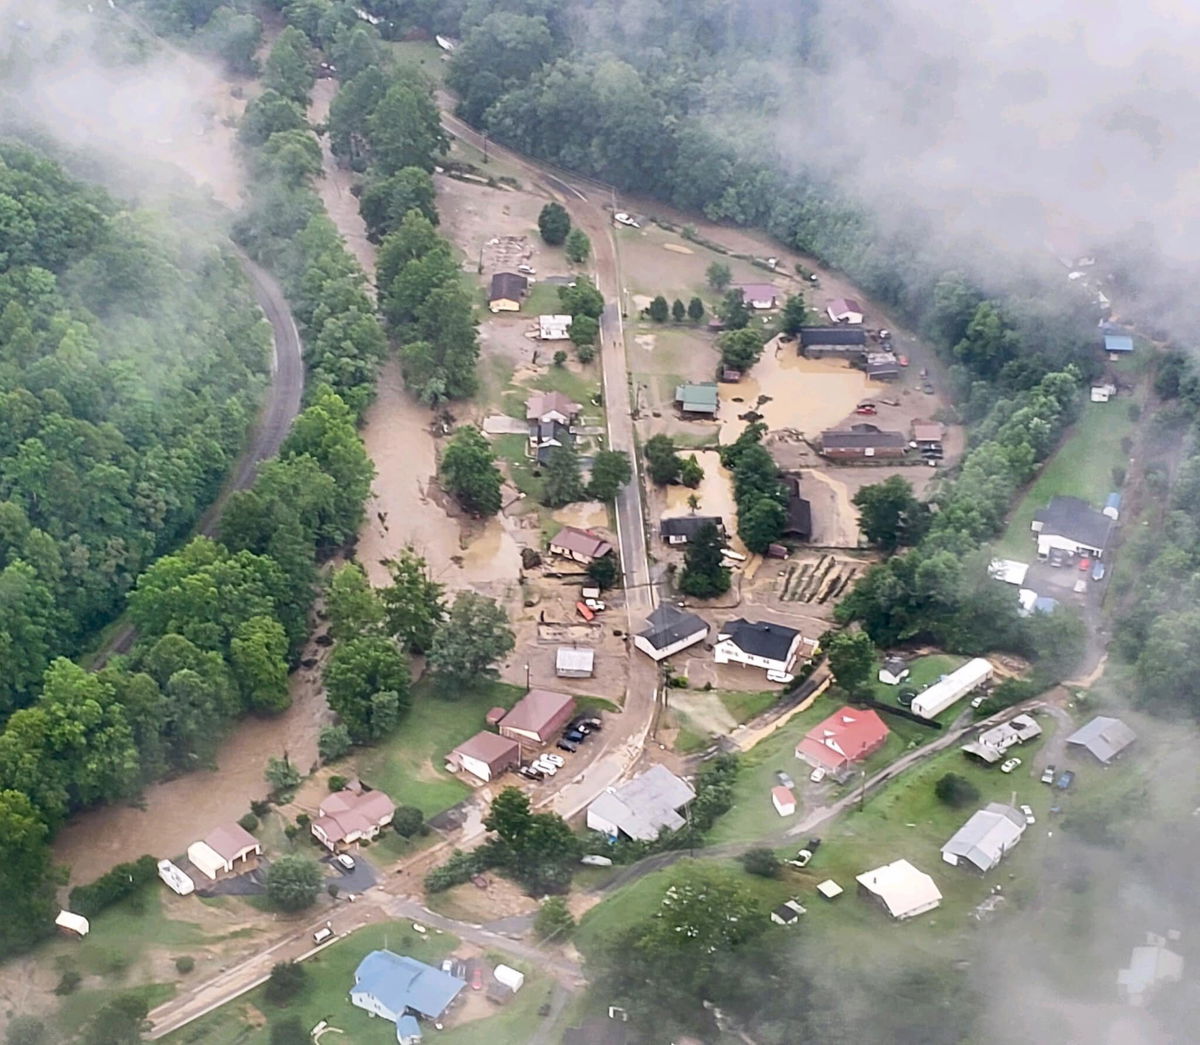 <i>Virginia DEM</i><br/>The Virginia Department of Emergency Management shared this aerial photograph of the damage in Buchanan County after heavy rains on July 12.